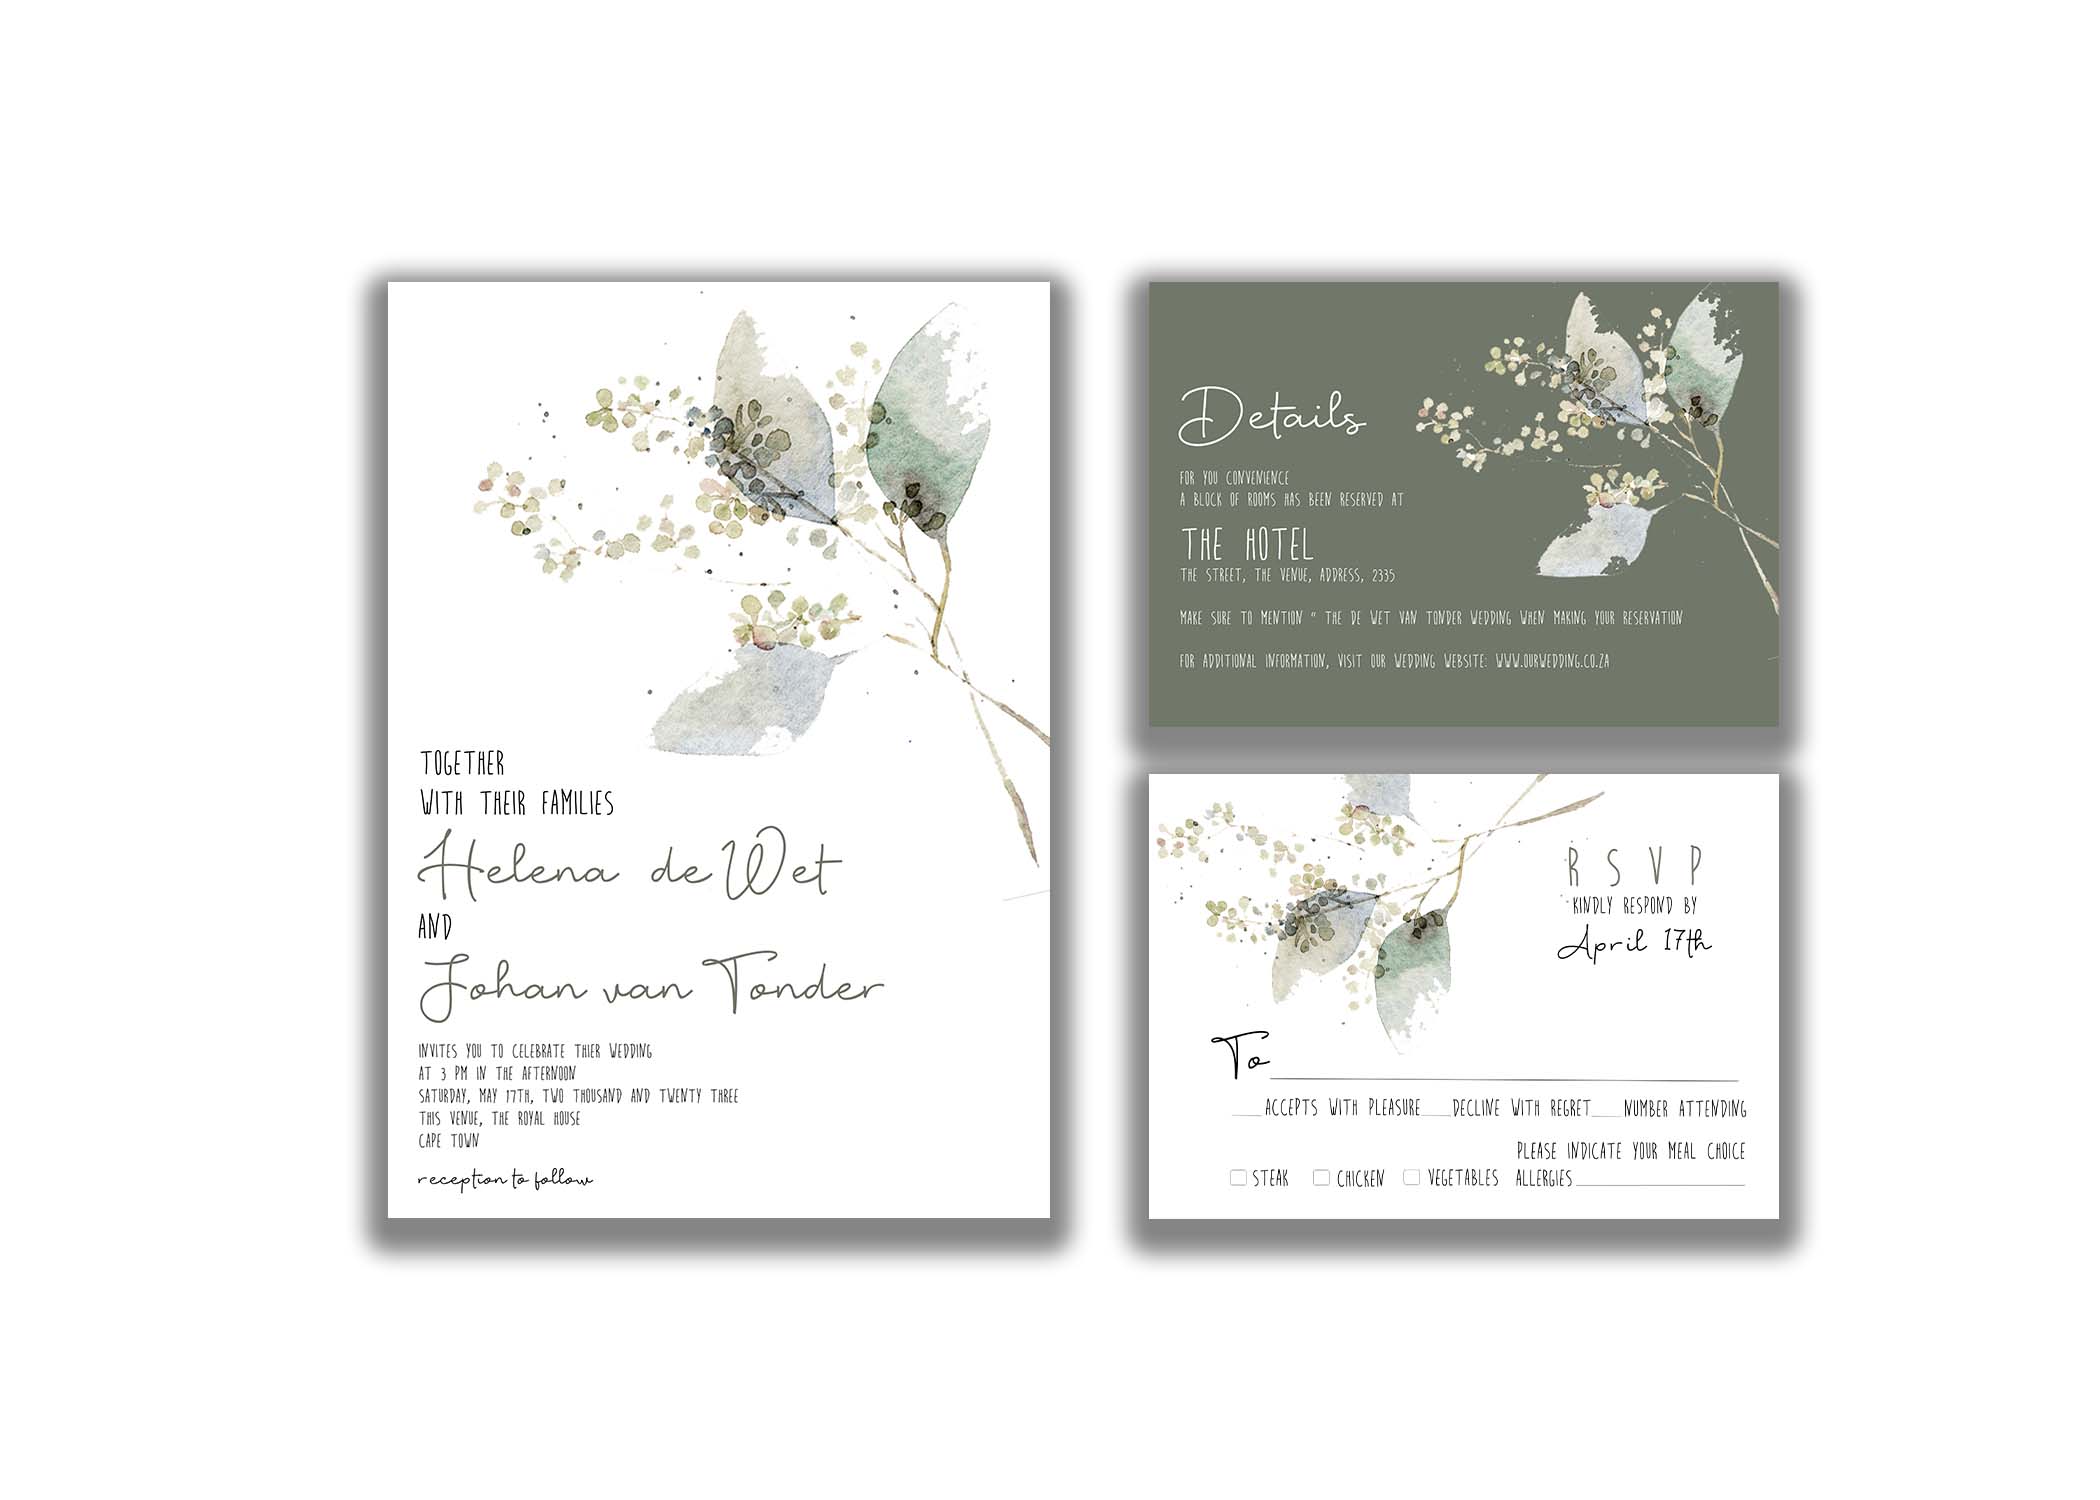 Preview of Limed Ash Wedding Invitation in JPEG and PSD formats, ready for customization and use.Digital wedding invitation showcasing a beautifully designed template with elegant typography and personalized details